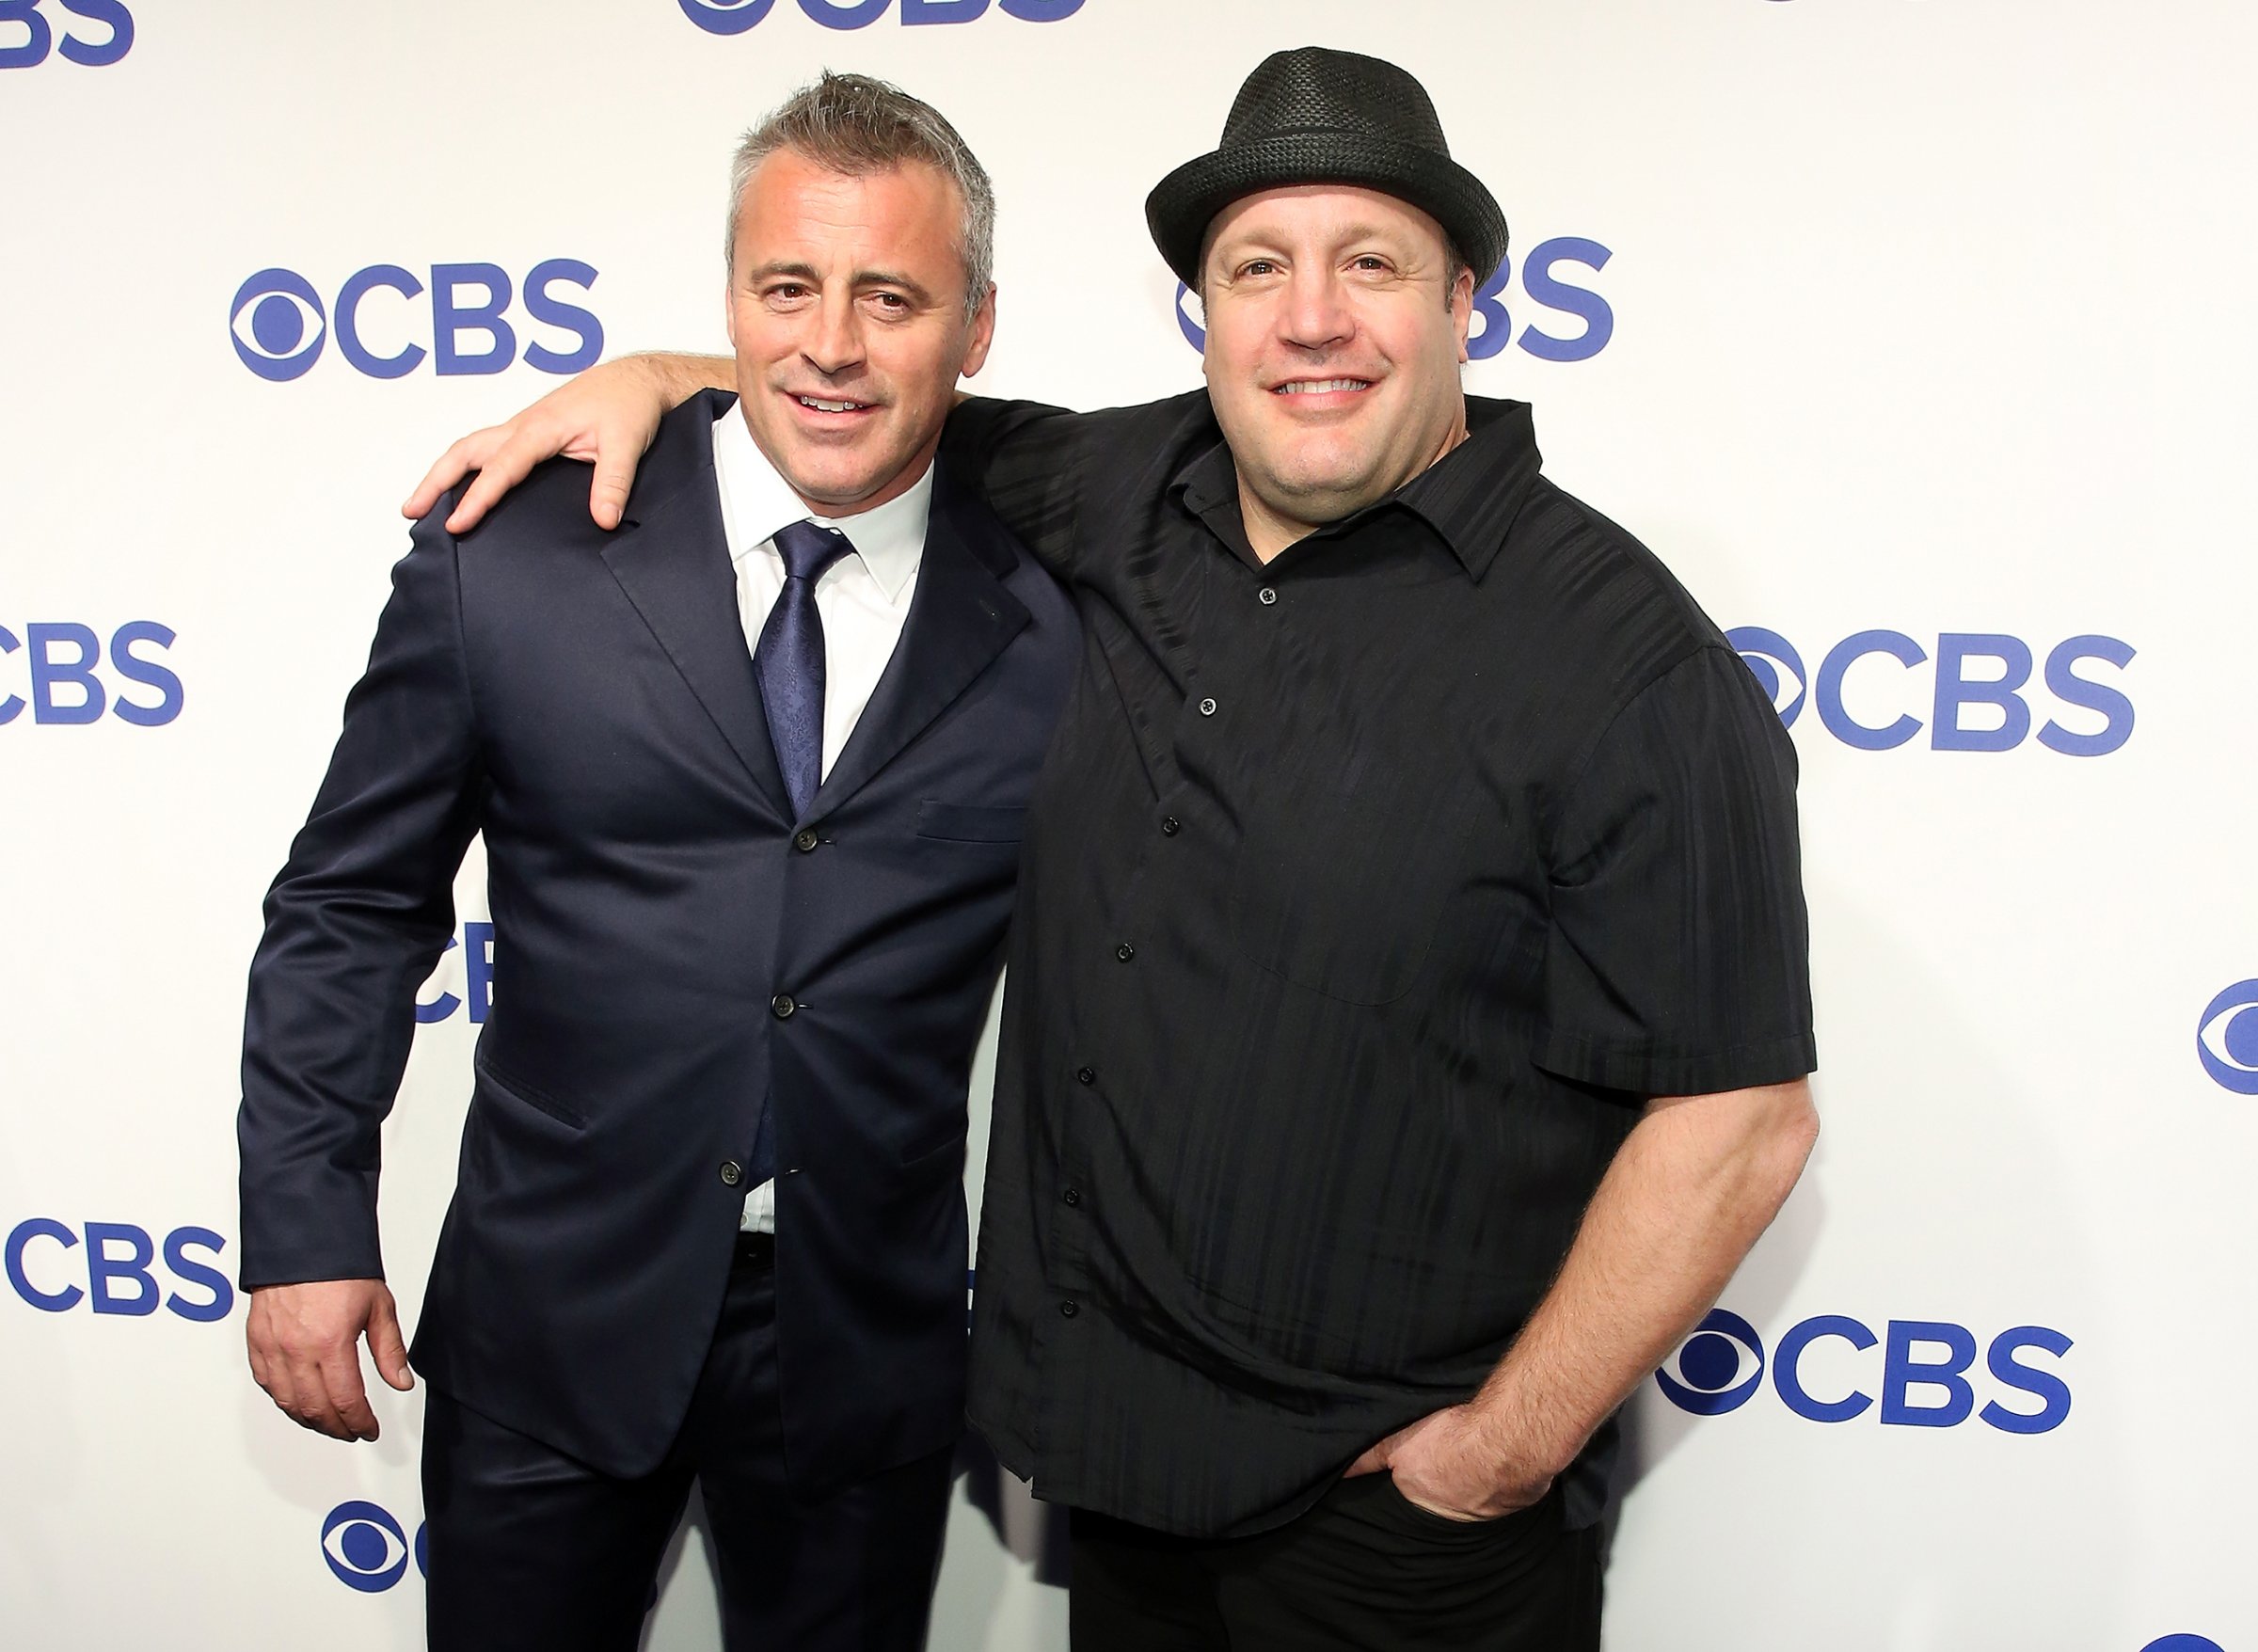 Matt LeBlanc and Kevin James attend the 2016 CBS Upfront at Oak Room in New York City on May 18, 2016.